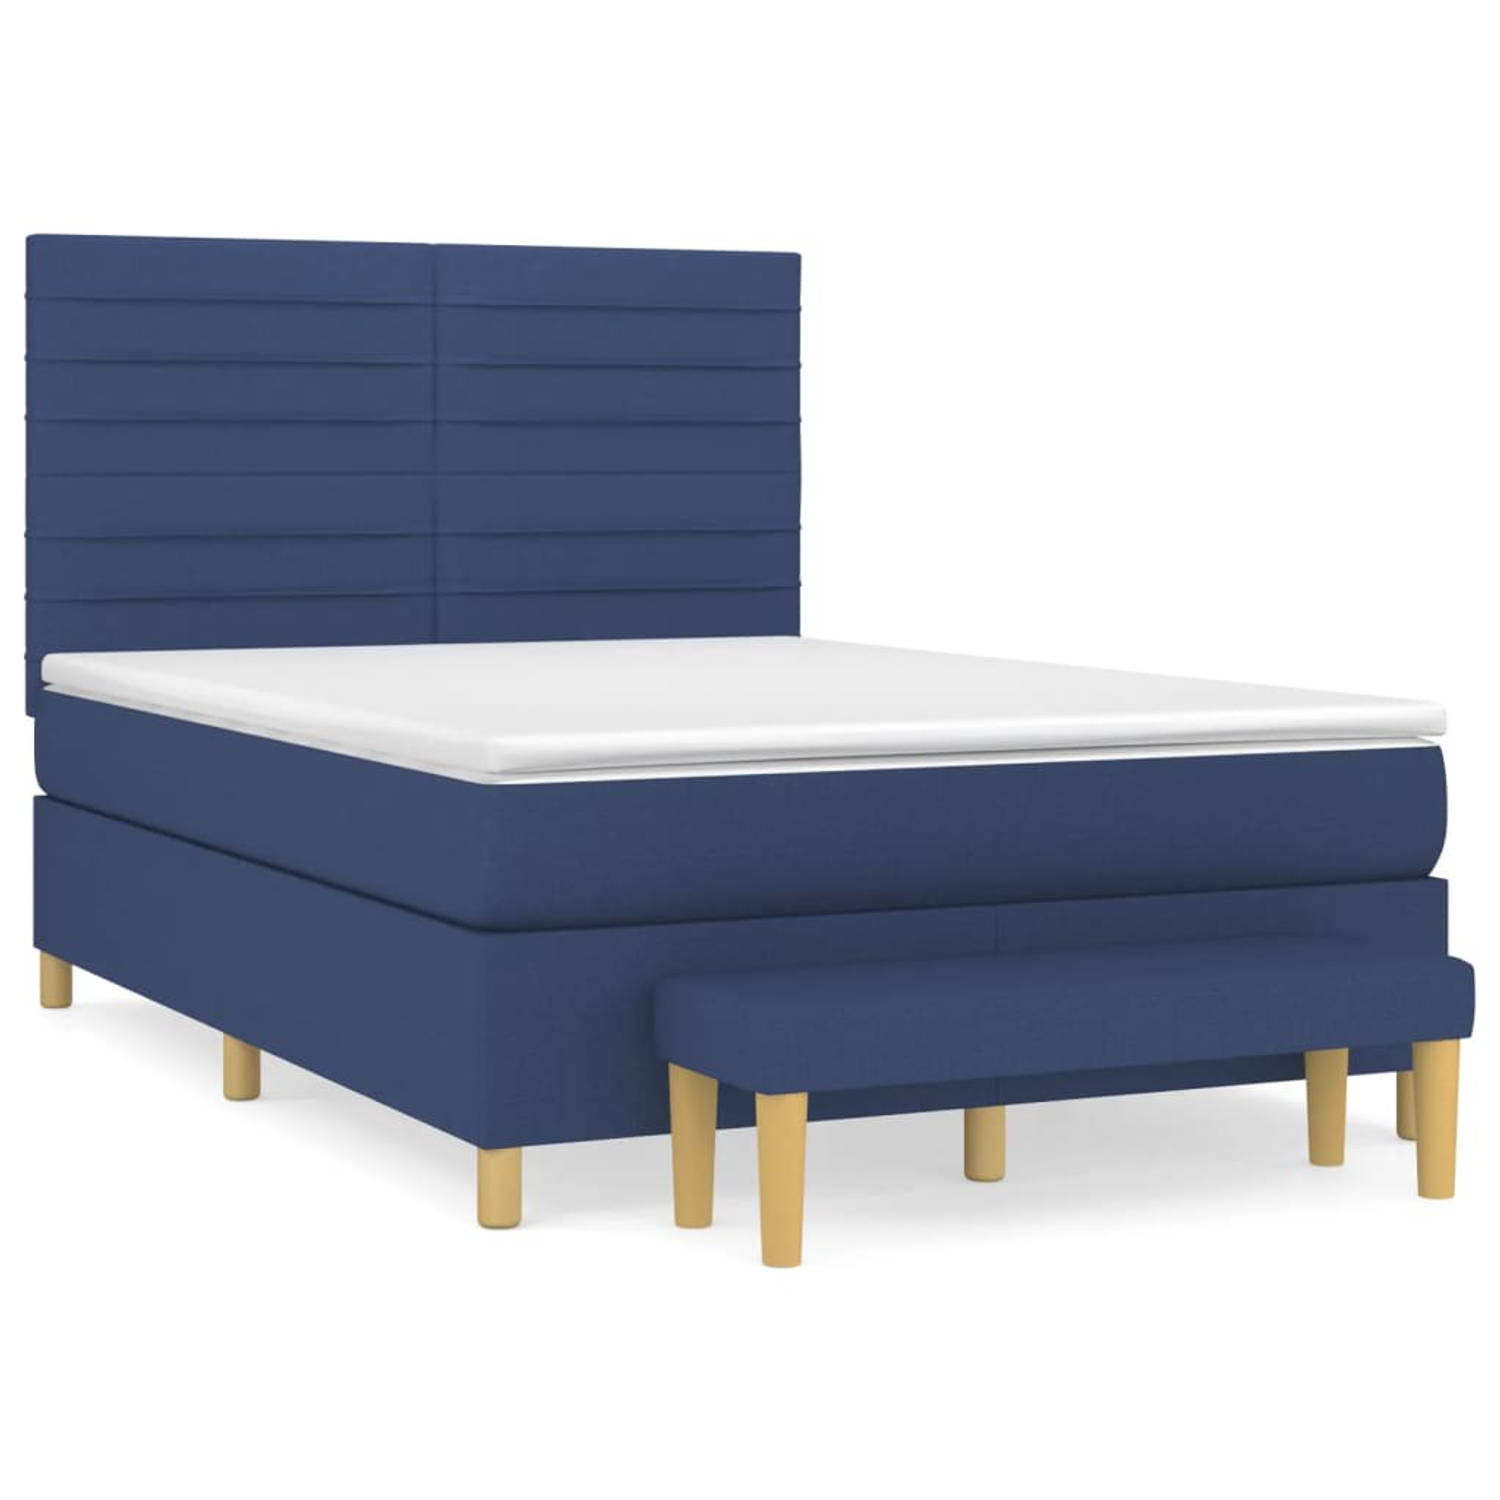 The Living Store Boxspringbed - Rustgevend - Bed - 203 x 144 x 118/128 cm - Blauw